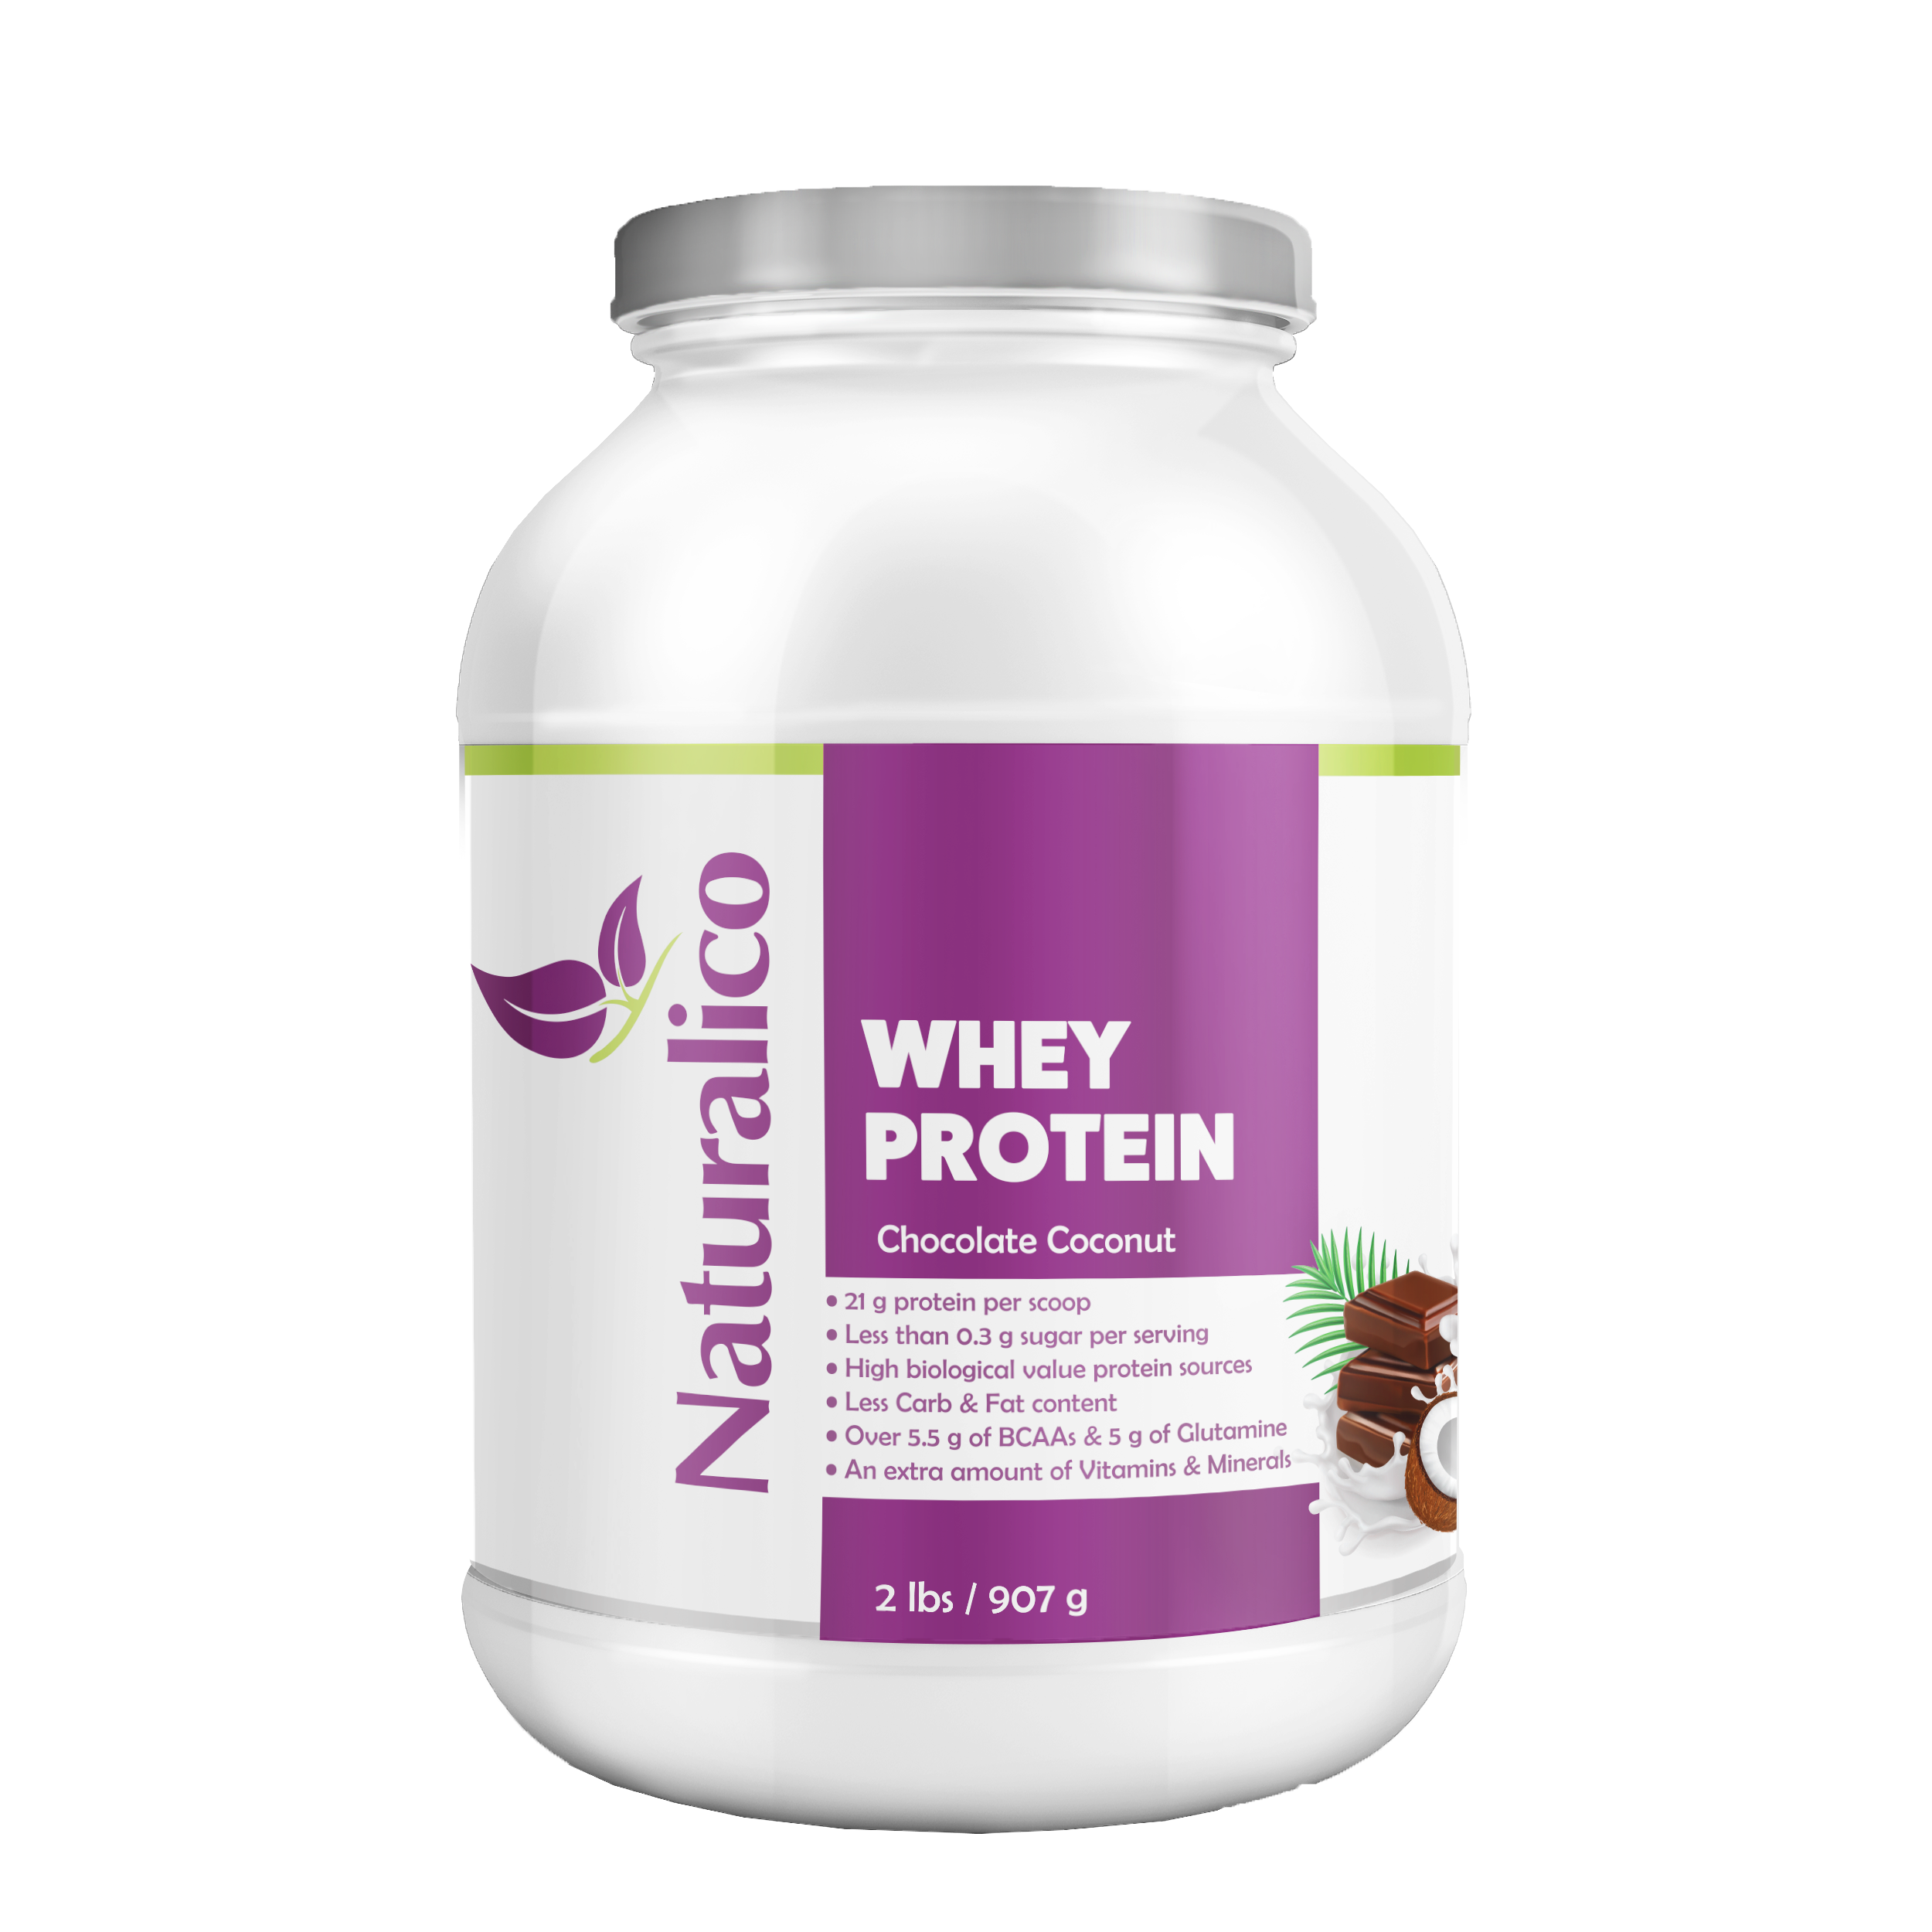 WHEY PROTEIN CHOCOLATE COCONUT 2 LBS